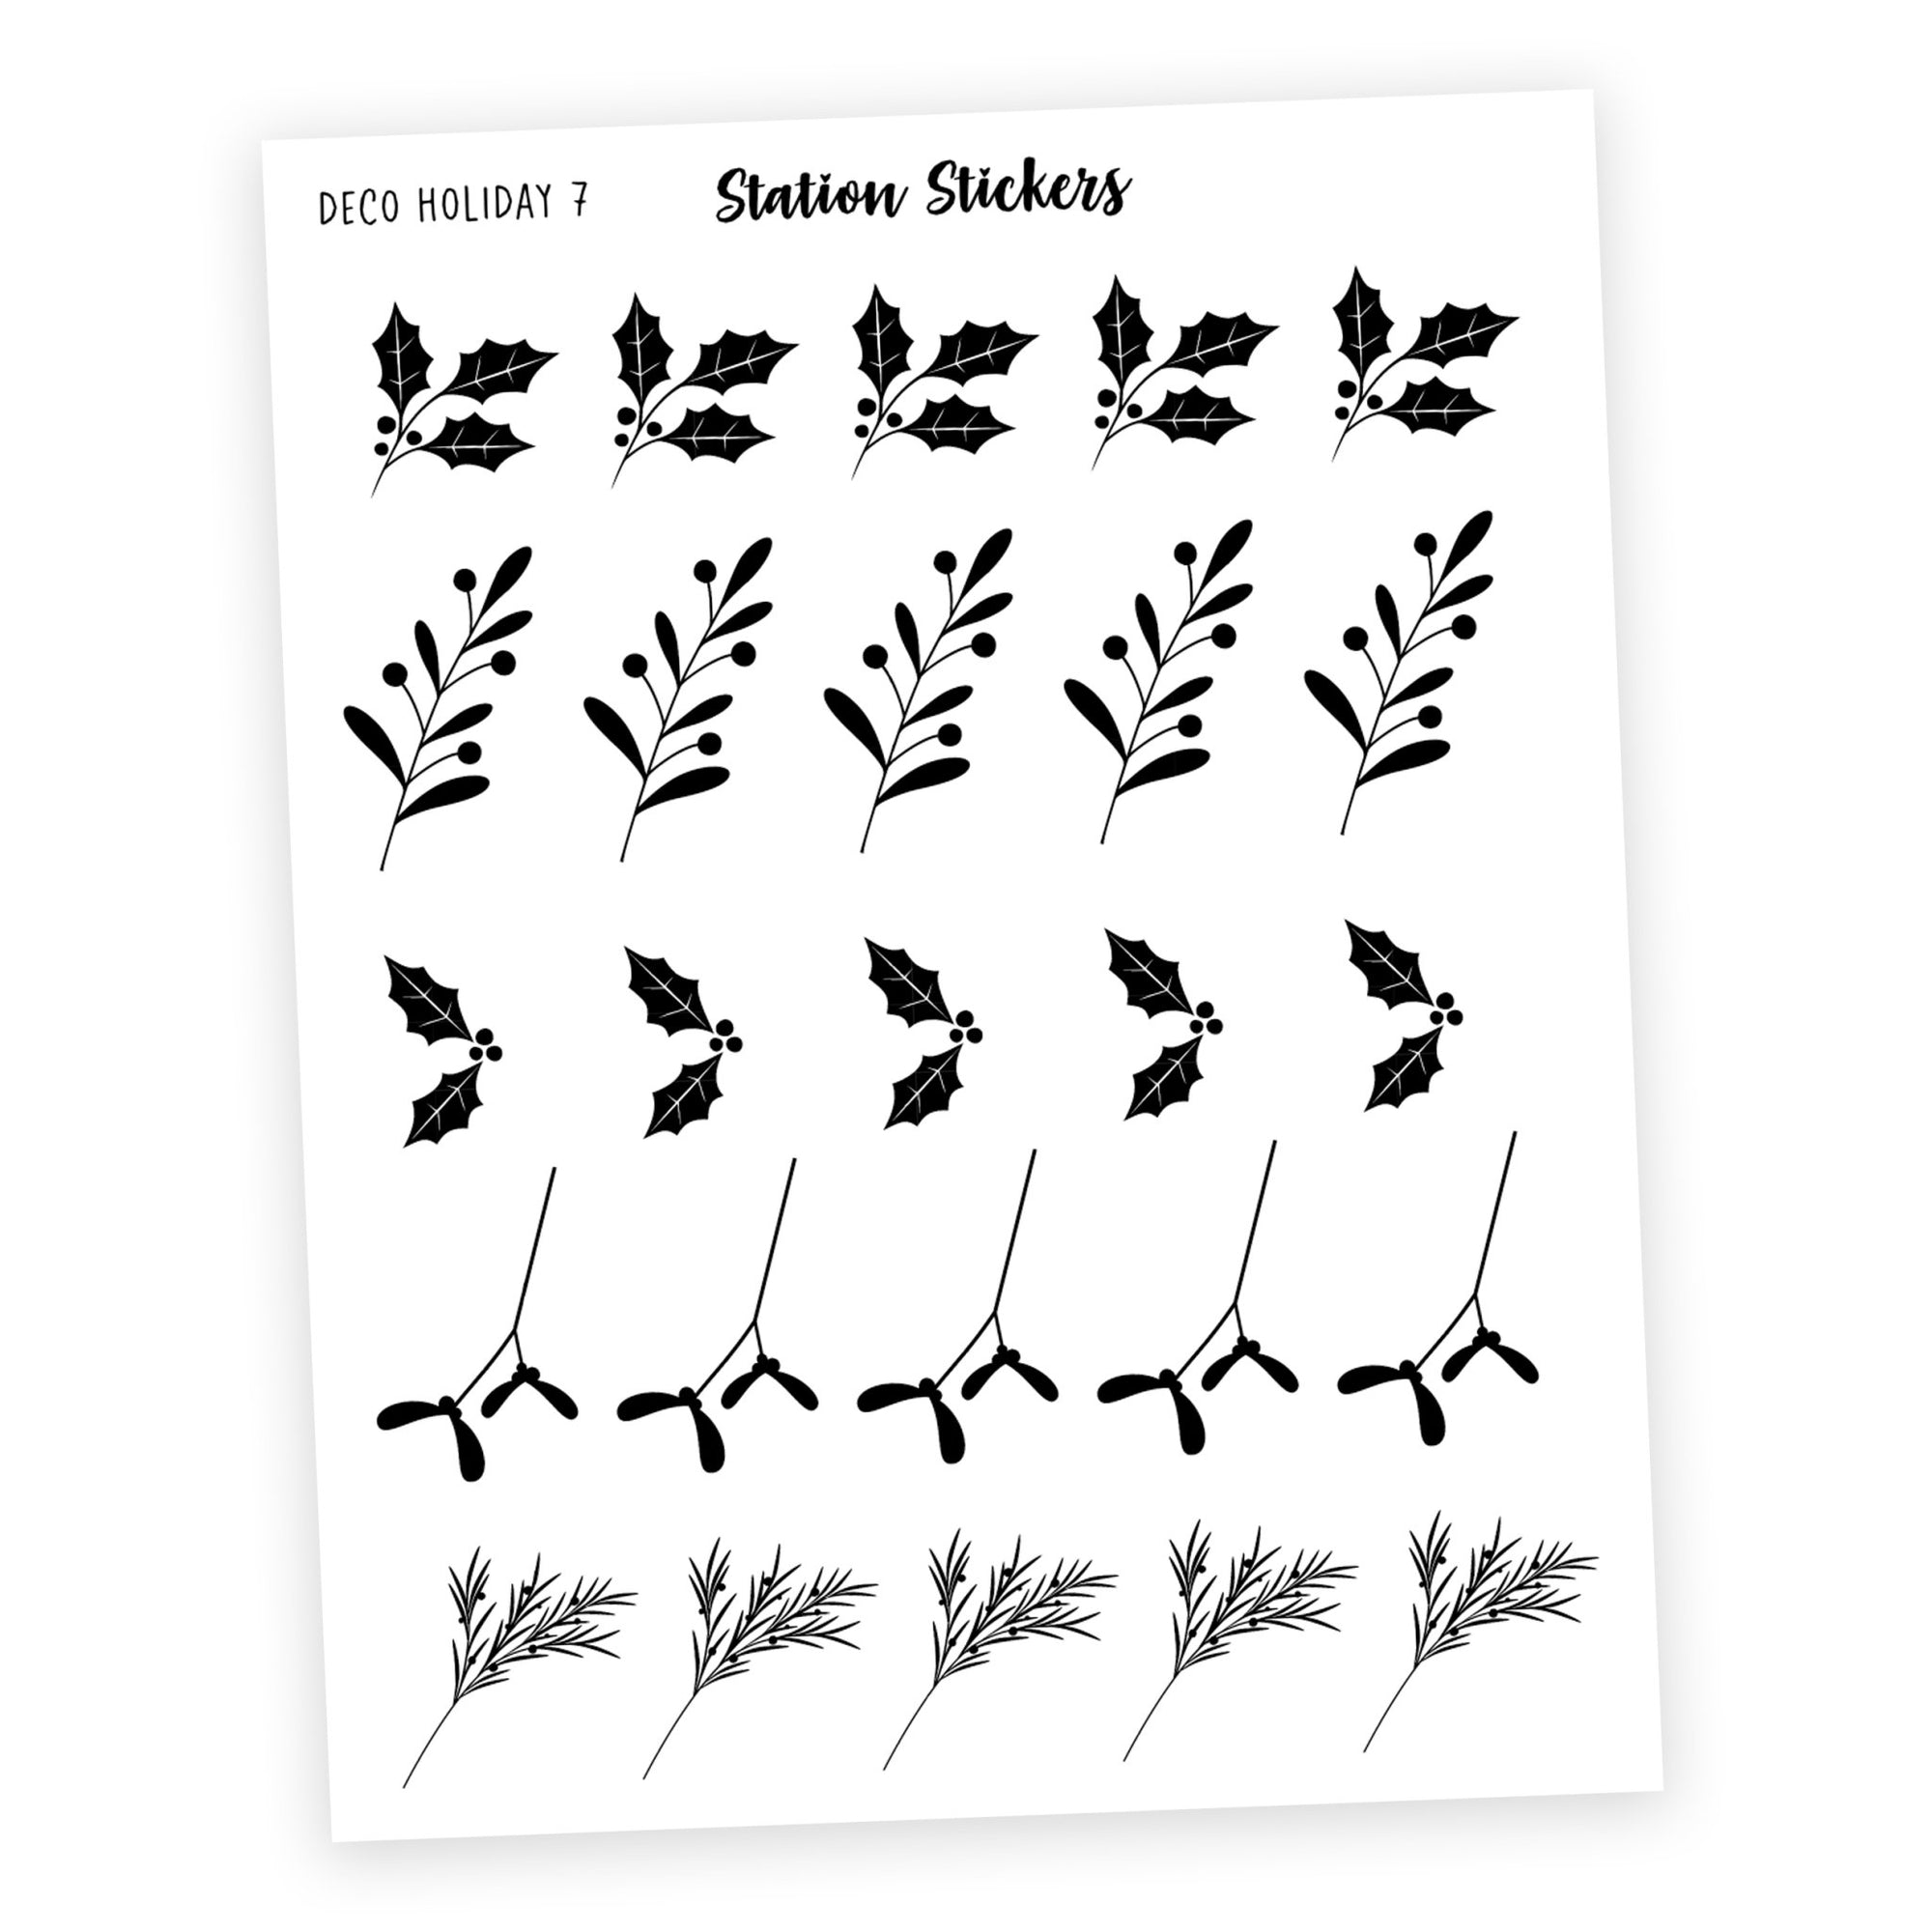 DECO • HOLIDAY 7 - Station Stickers